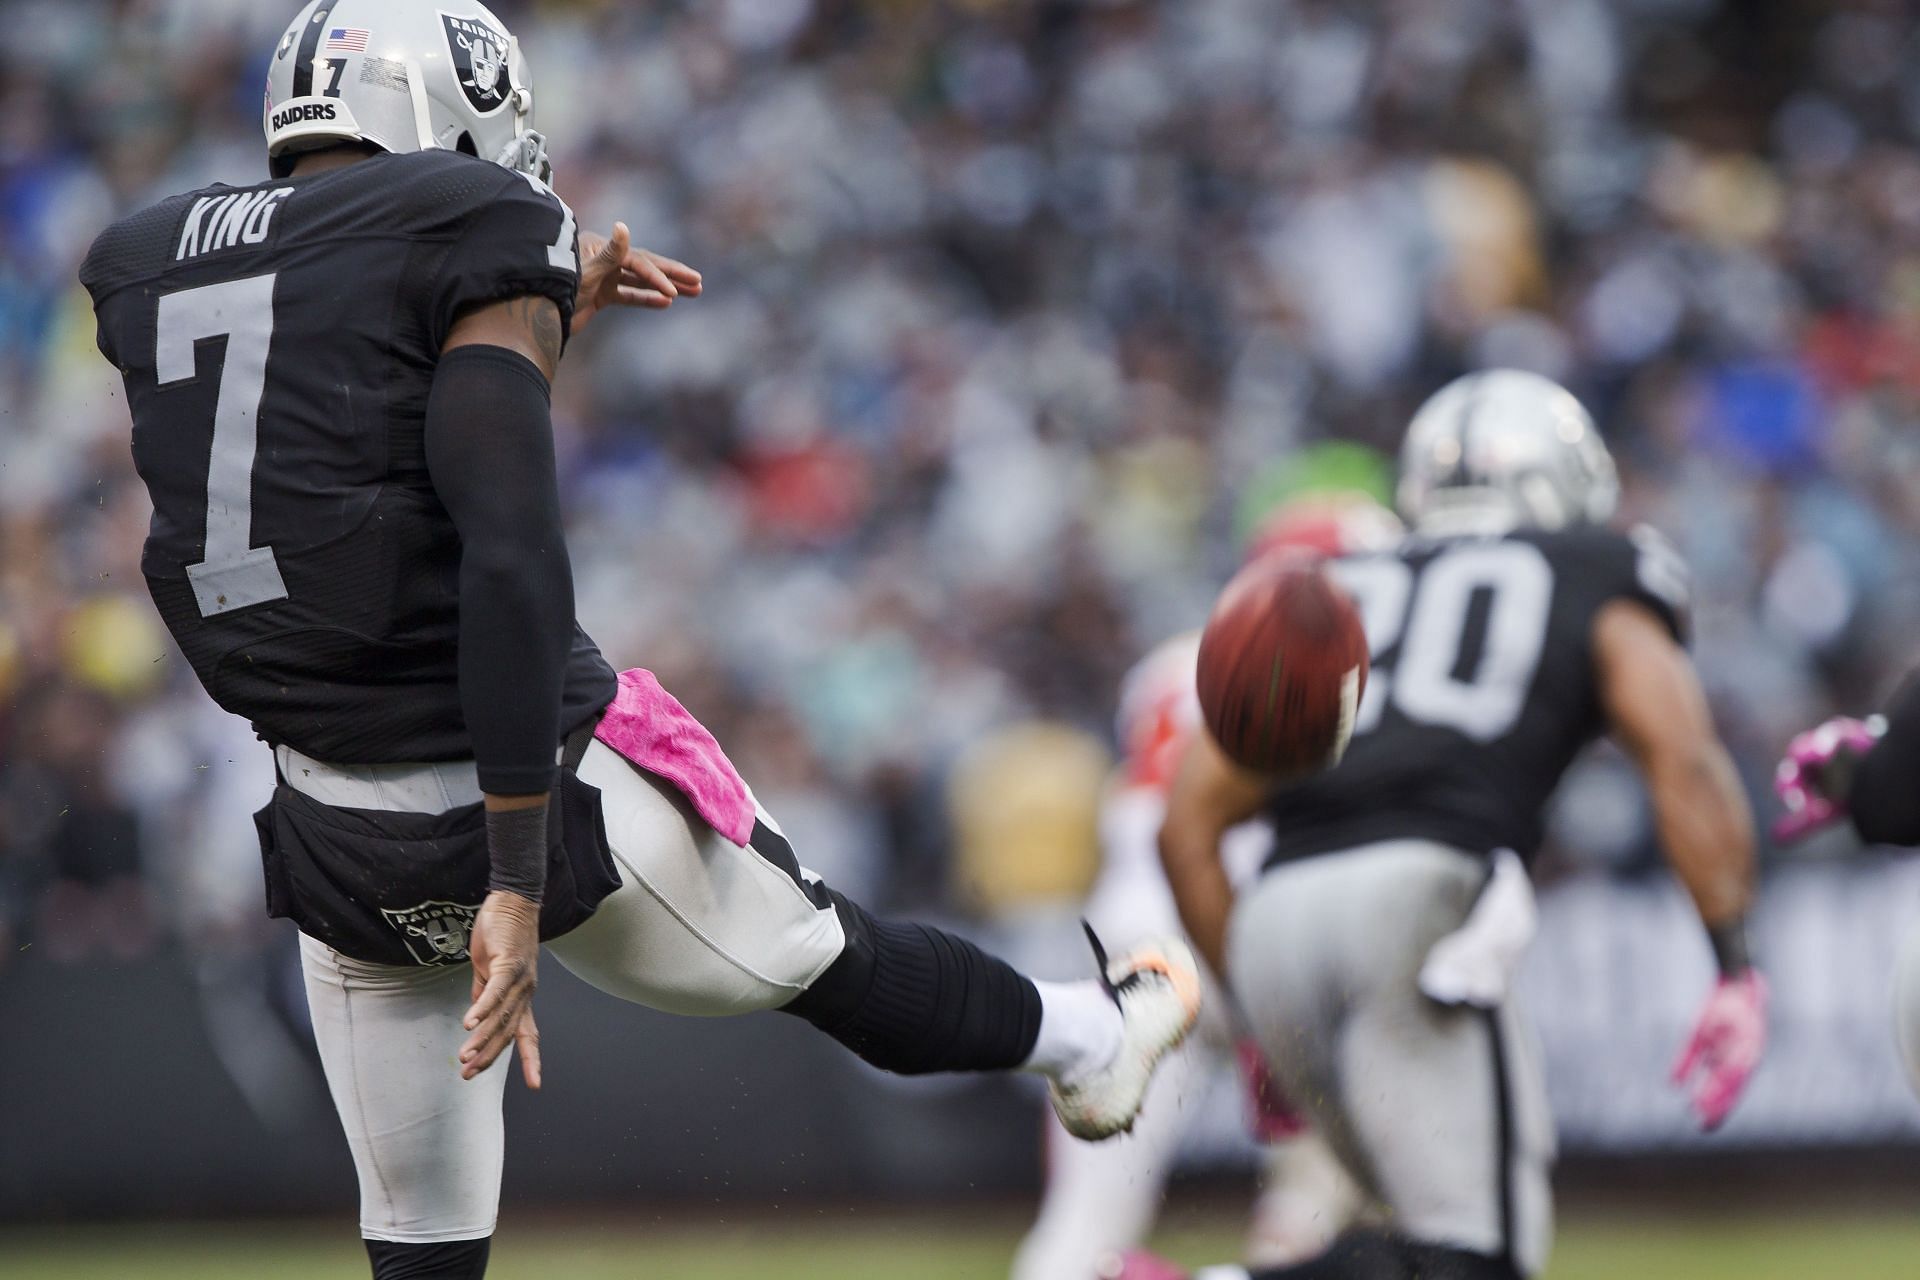 Former Raiders punter Marquette King sends one downfield